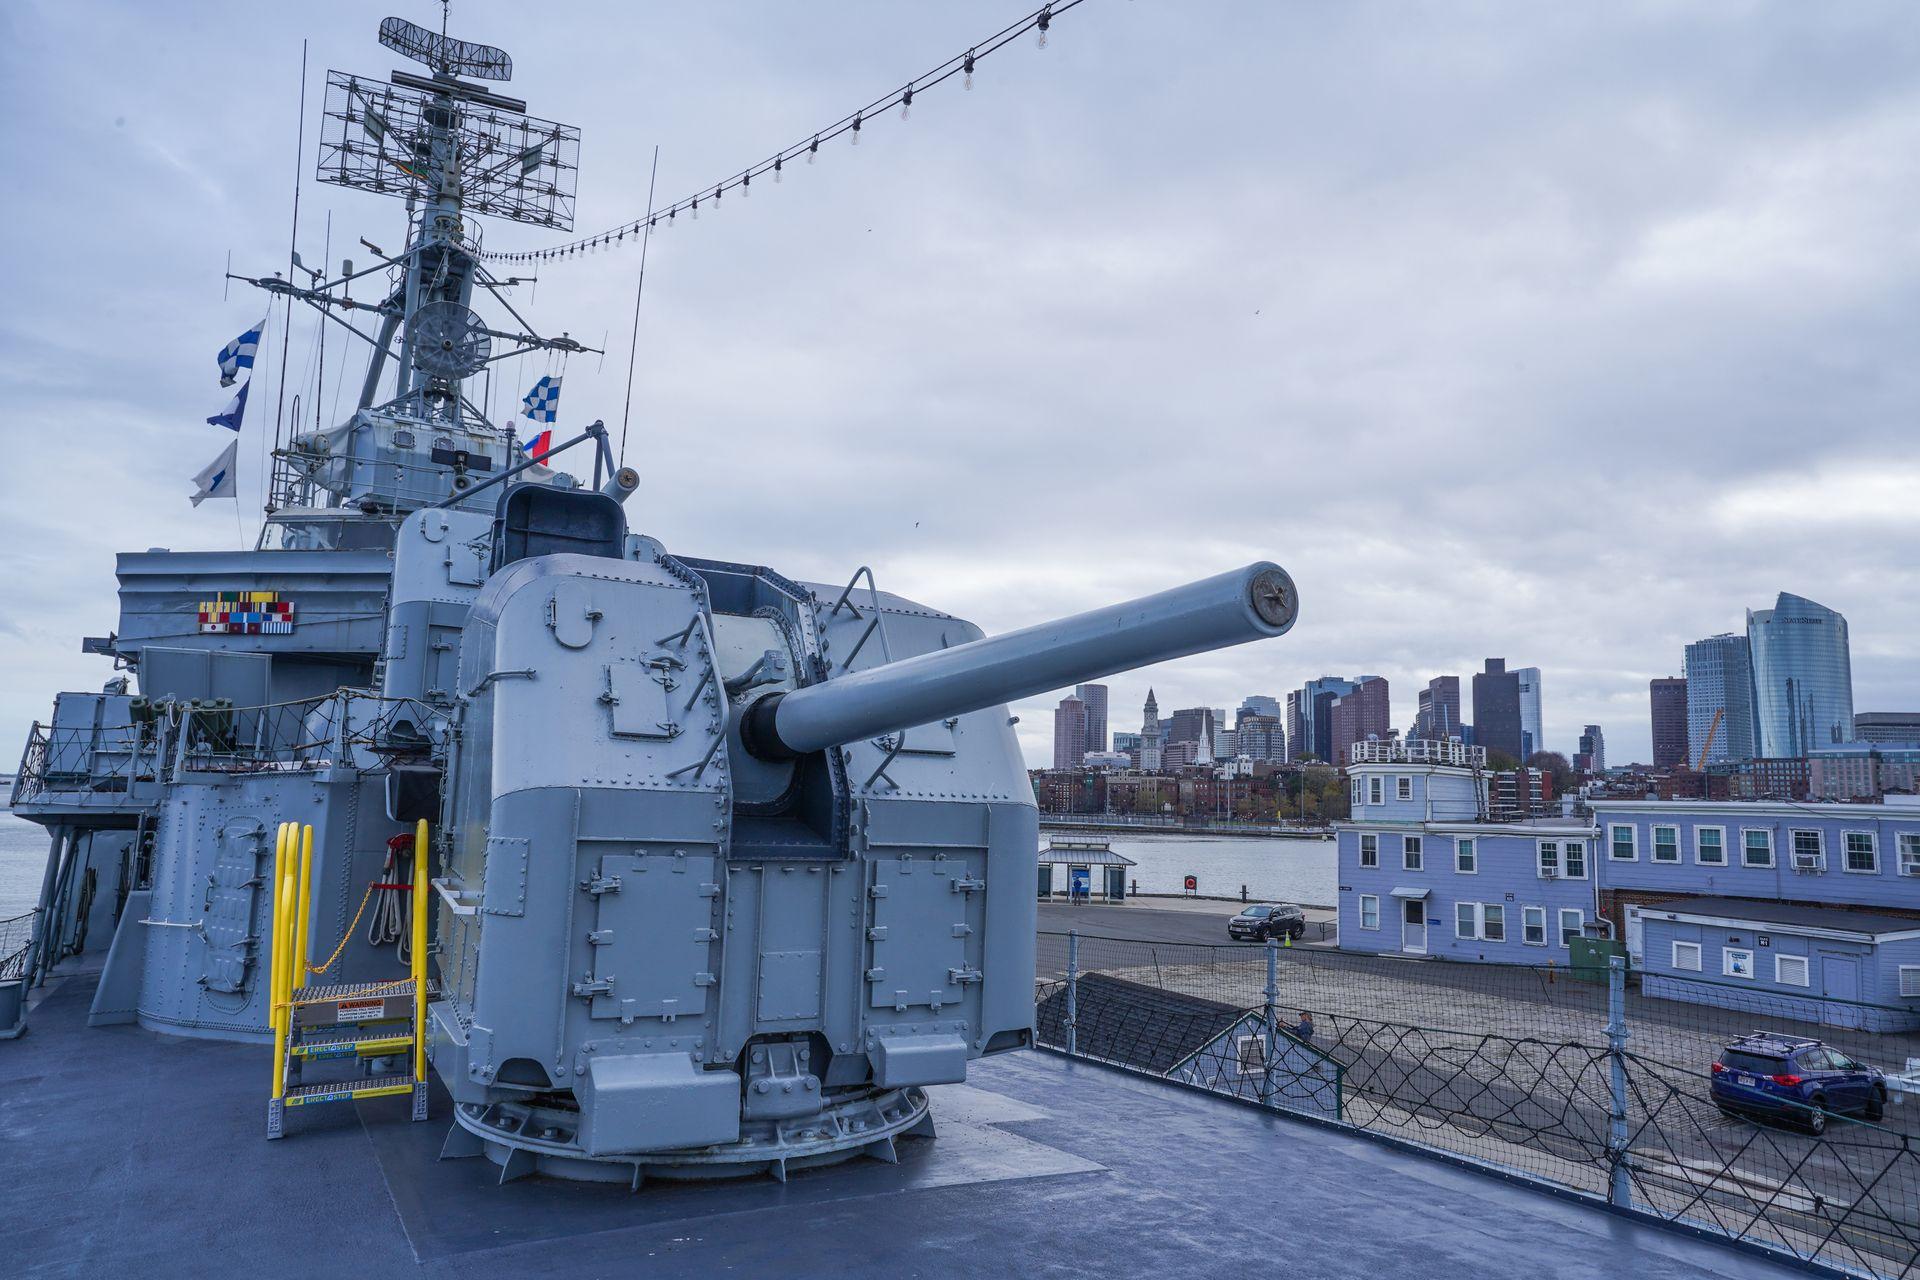 A weapon on top of the USS Cassin Young. The ship floats in the harbor and you can see the downtown Boston in the background.